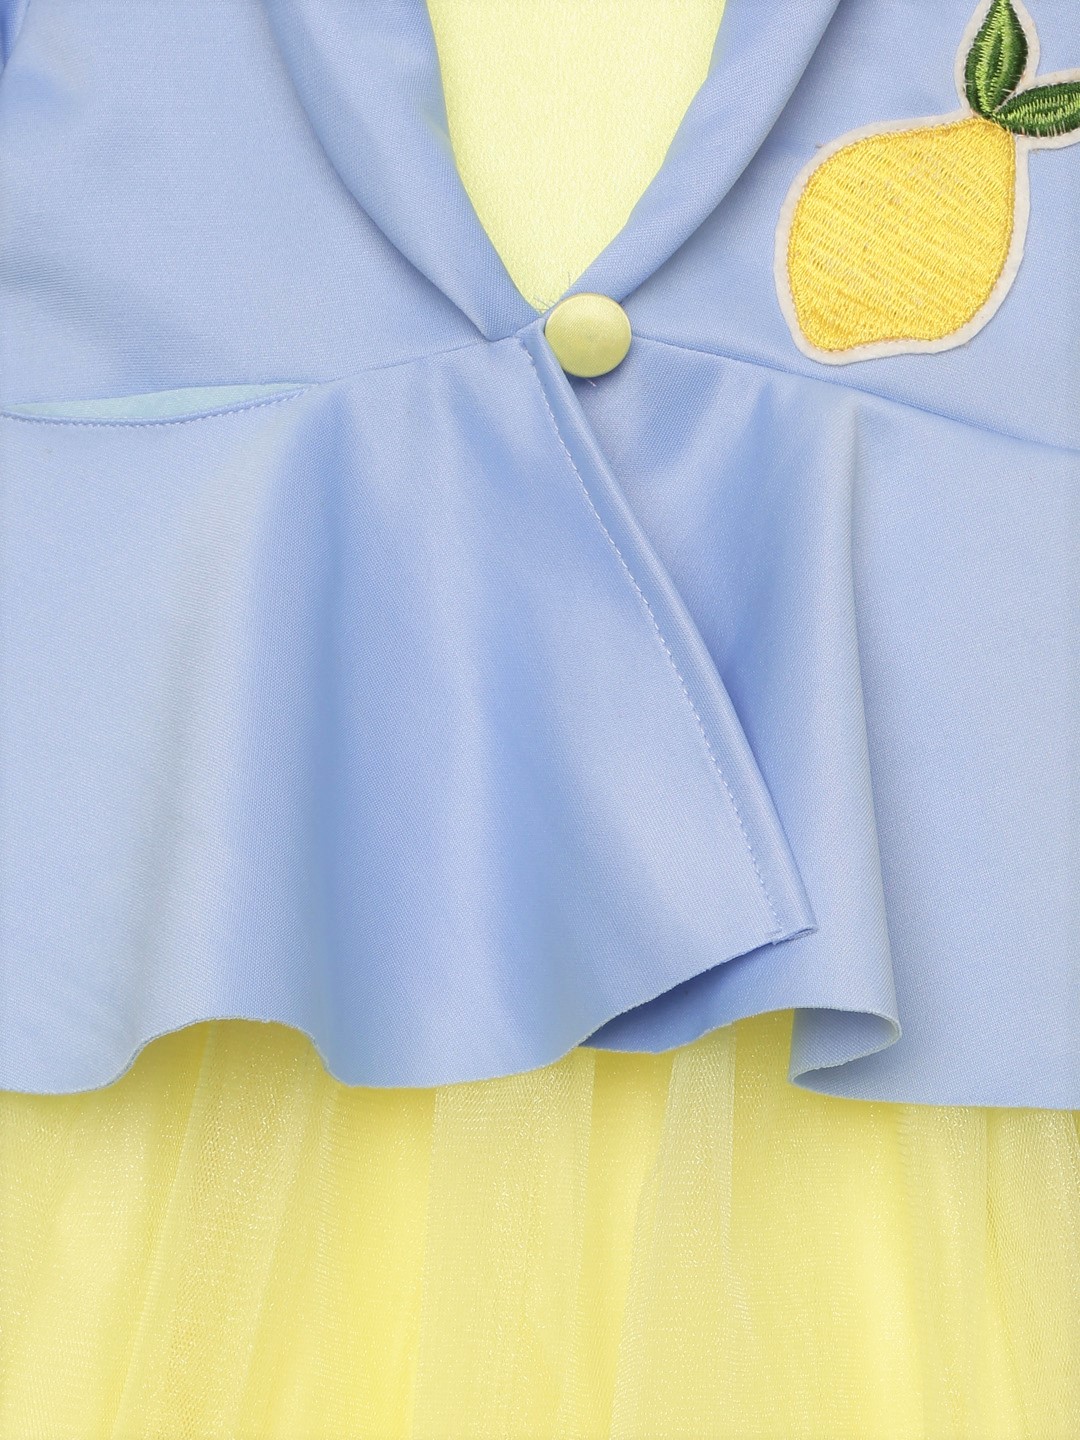 6 1 Gown with Lemon Embroided Patch and Peplum Jacket